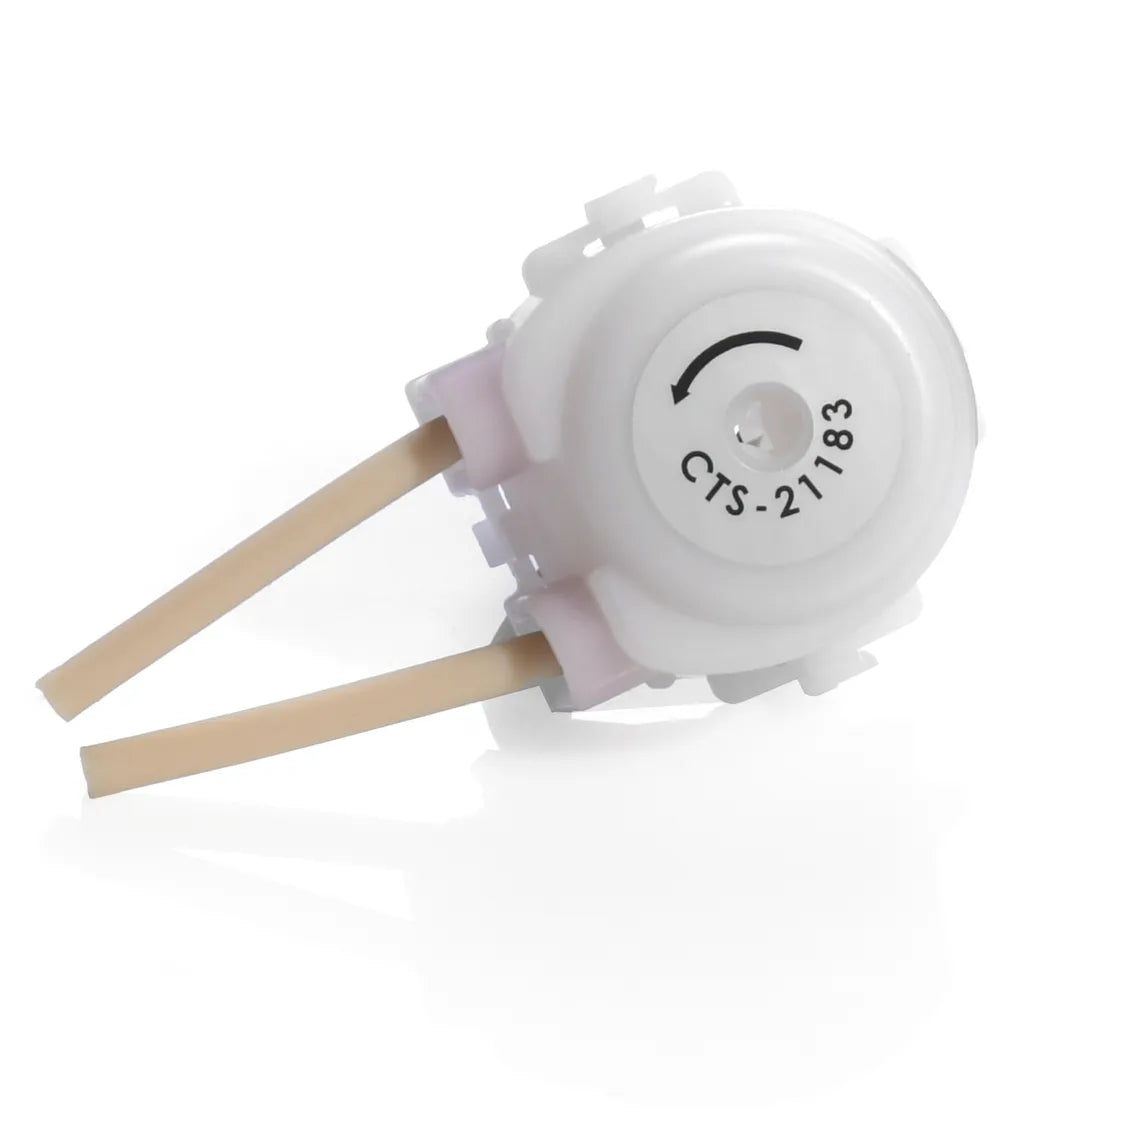 Peristaltic Pump-White Driver and Rollers, Comparable to Agilent # 5065-4445